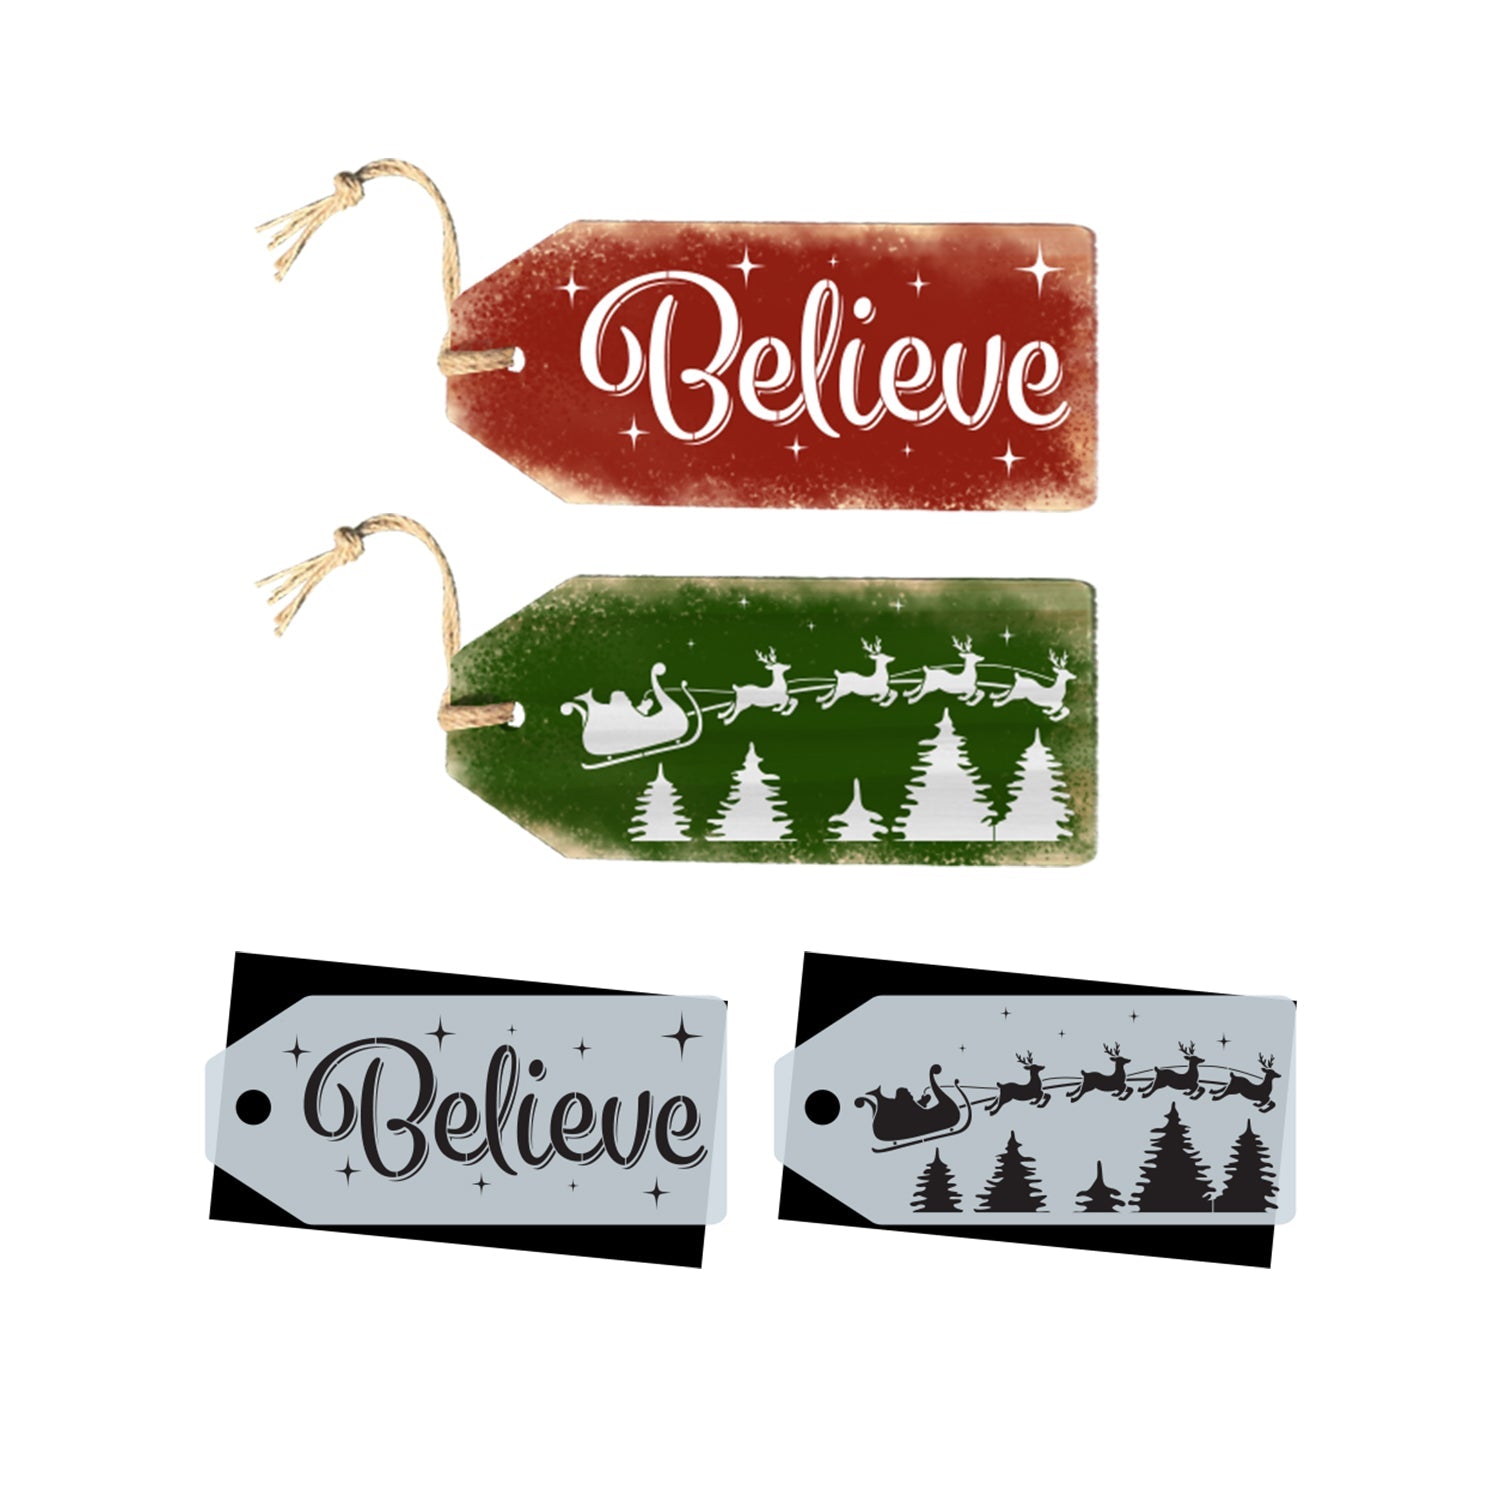 DIY reusable Christmas farmhouse large wood tags, Believe wood tag Santa's sleigh and reindeer with pine trees wood tag, Front door Christmas wood tags  Large Christmas wood tags, Christmas front door wreath tags, 